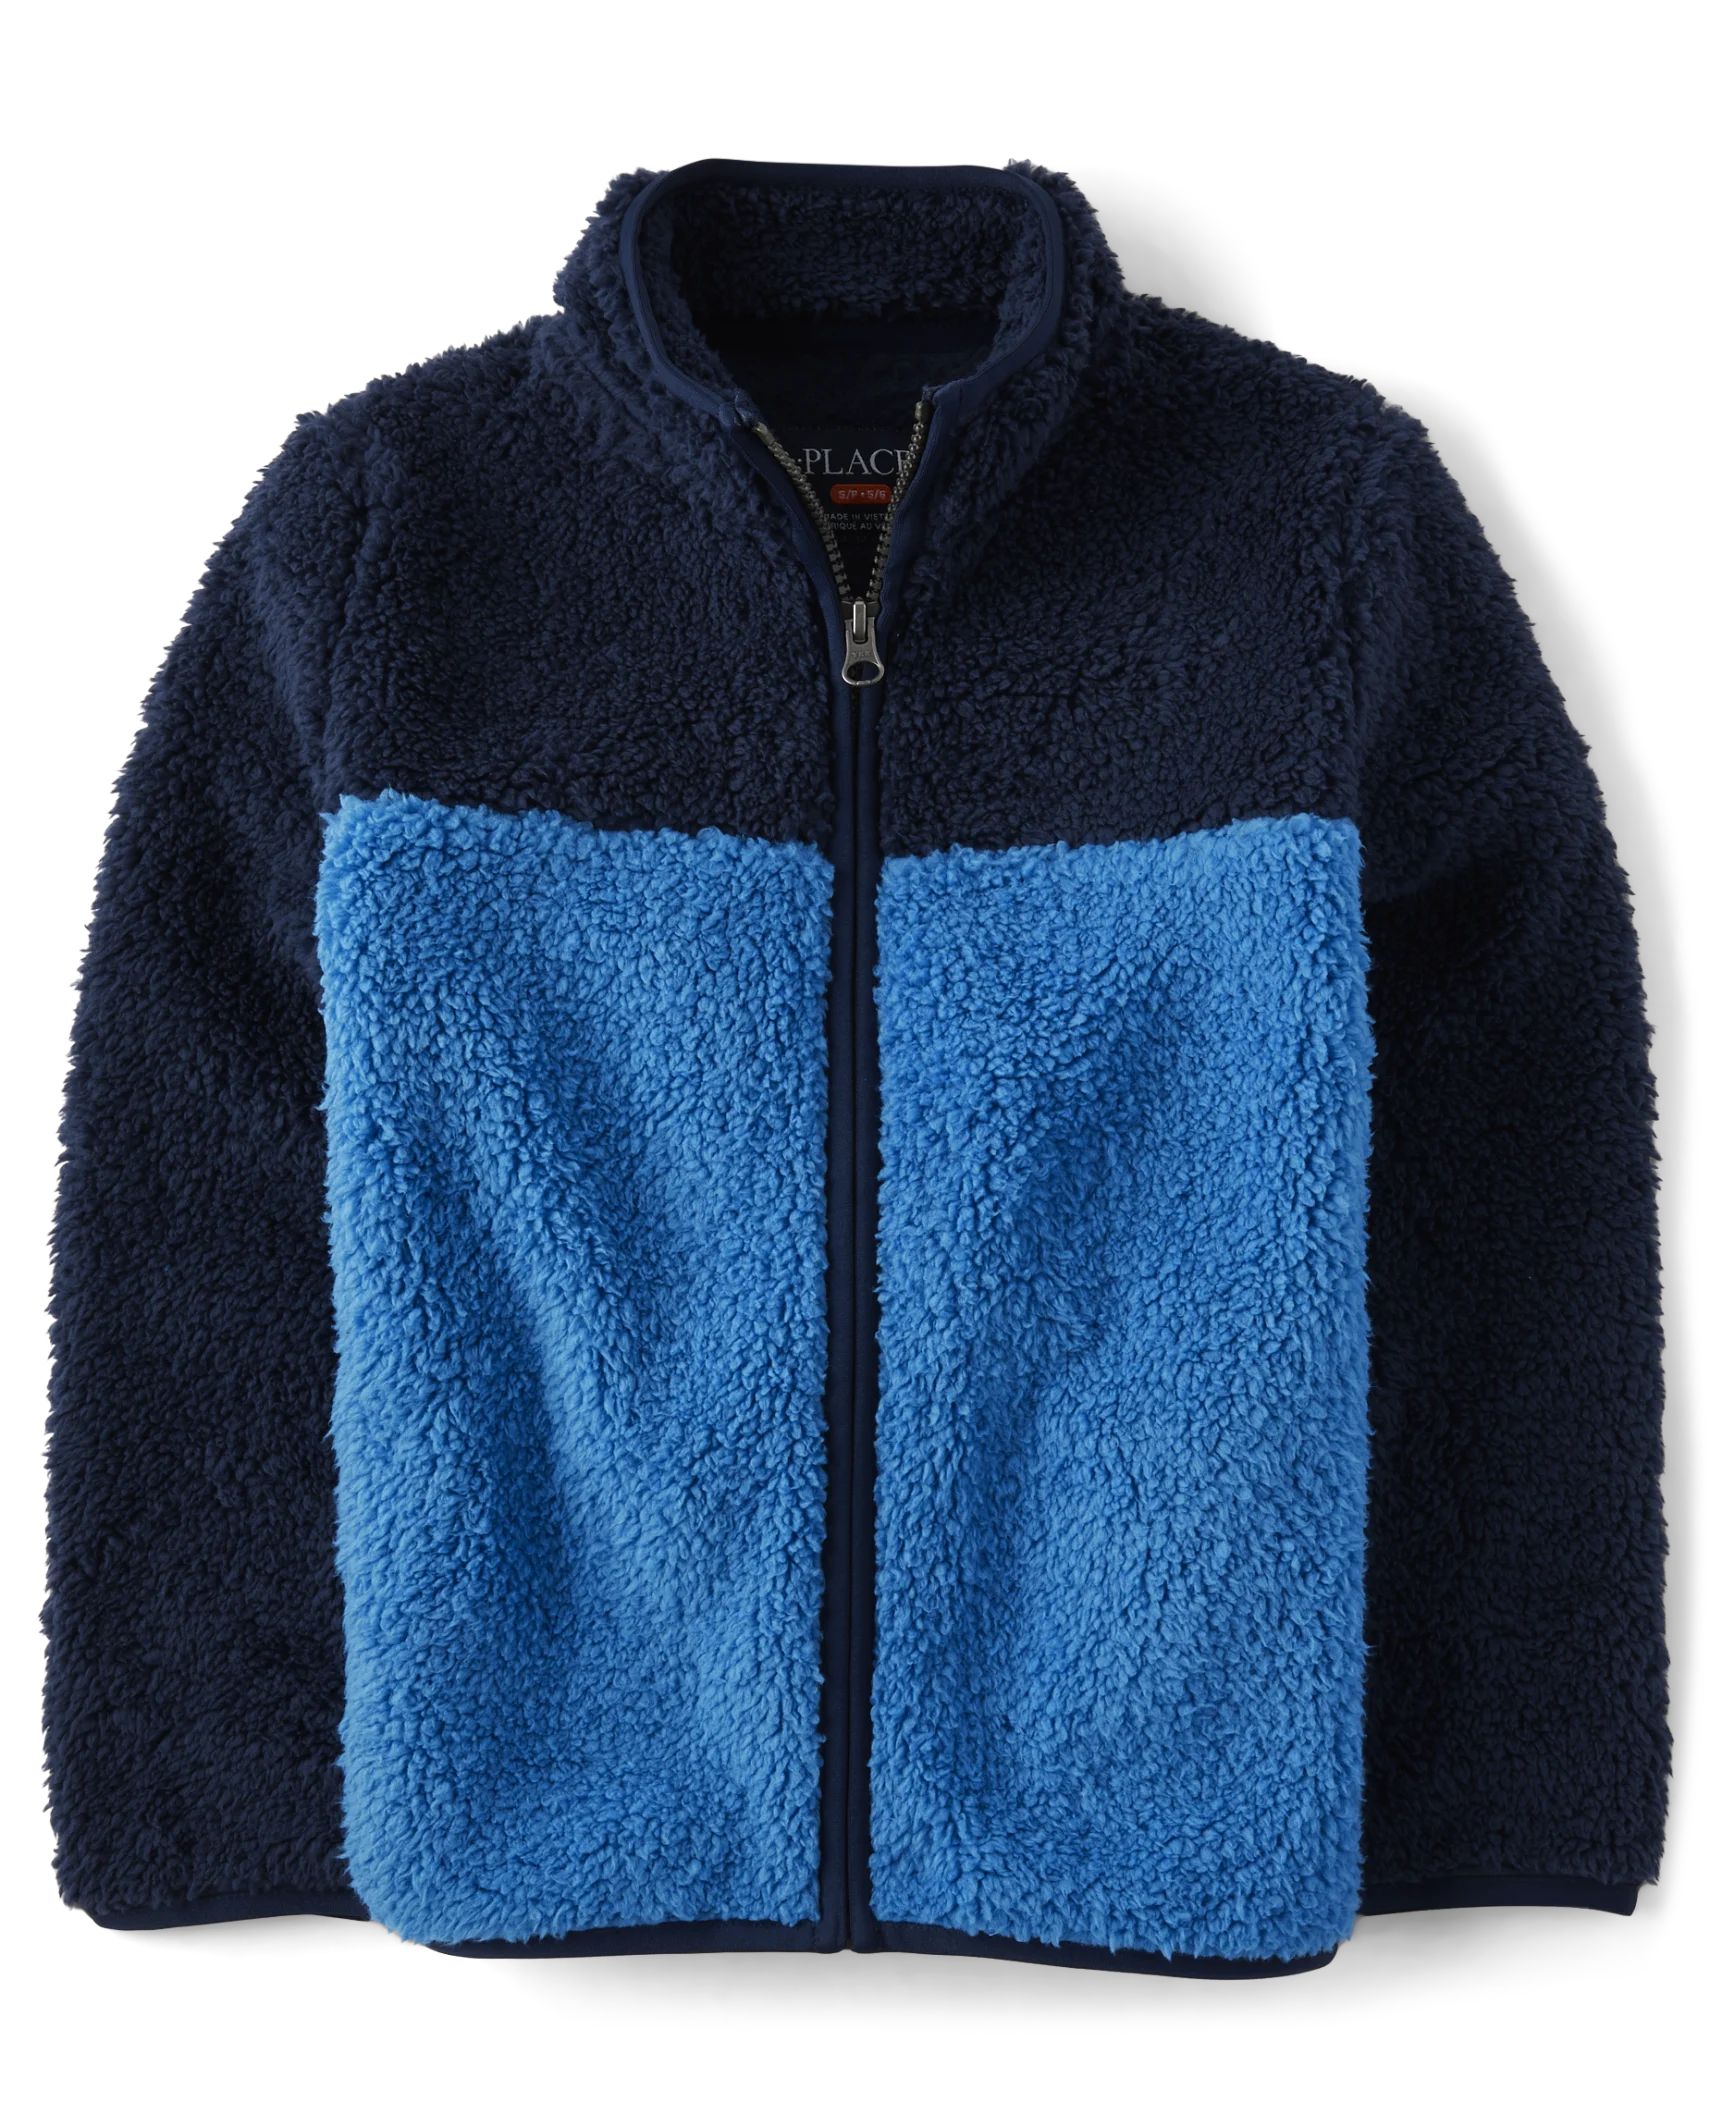 Boys Colorblock Sherpa Zip-Up Jacket - toucan feather | The Children's Place